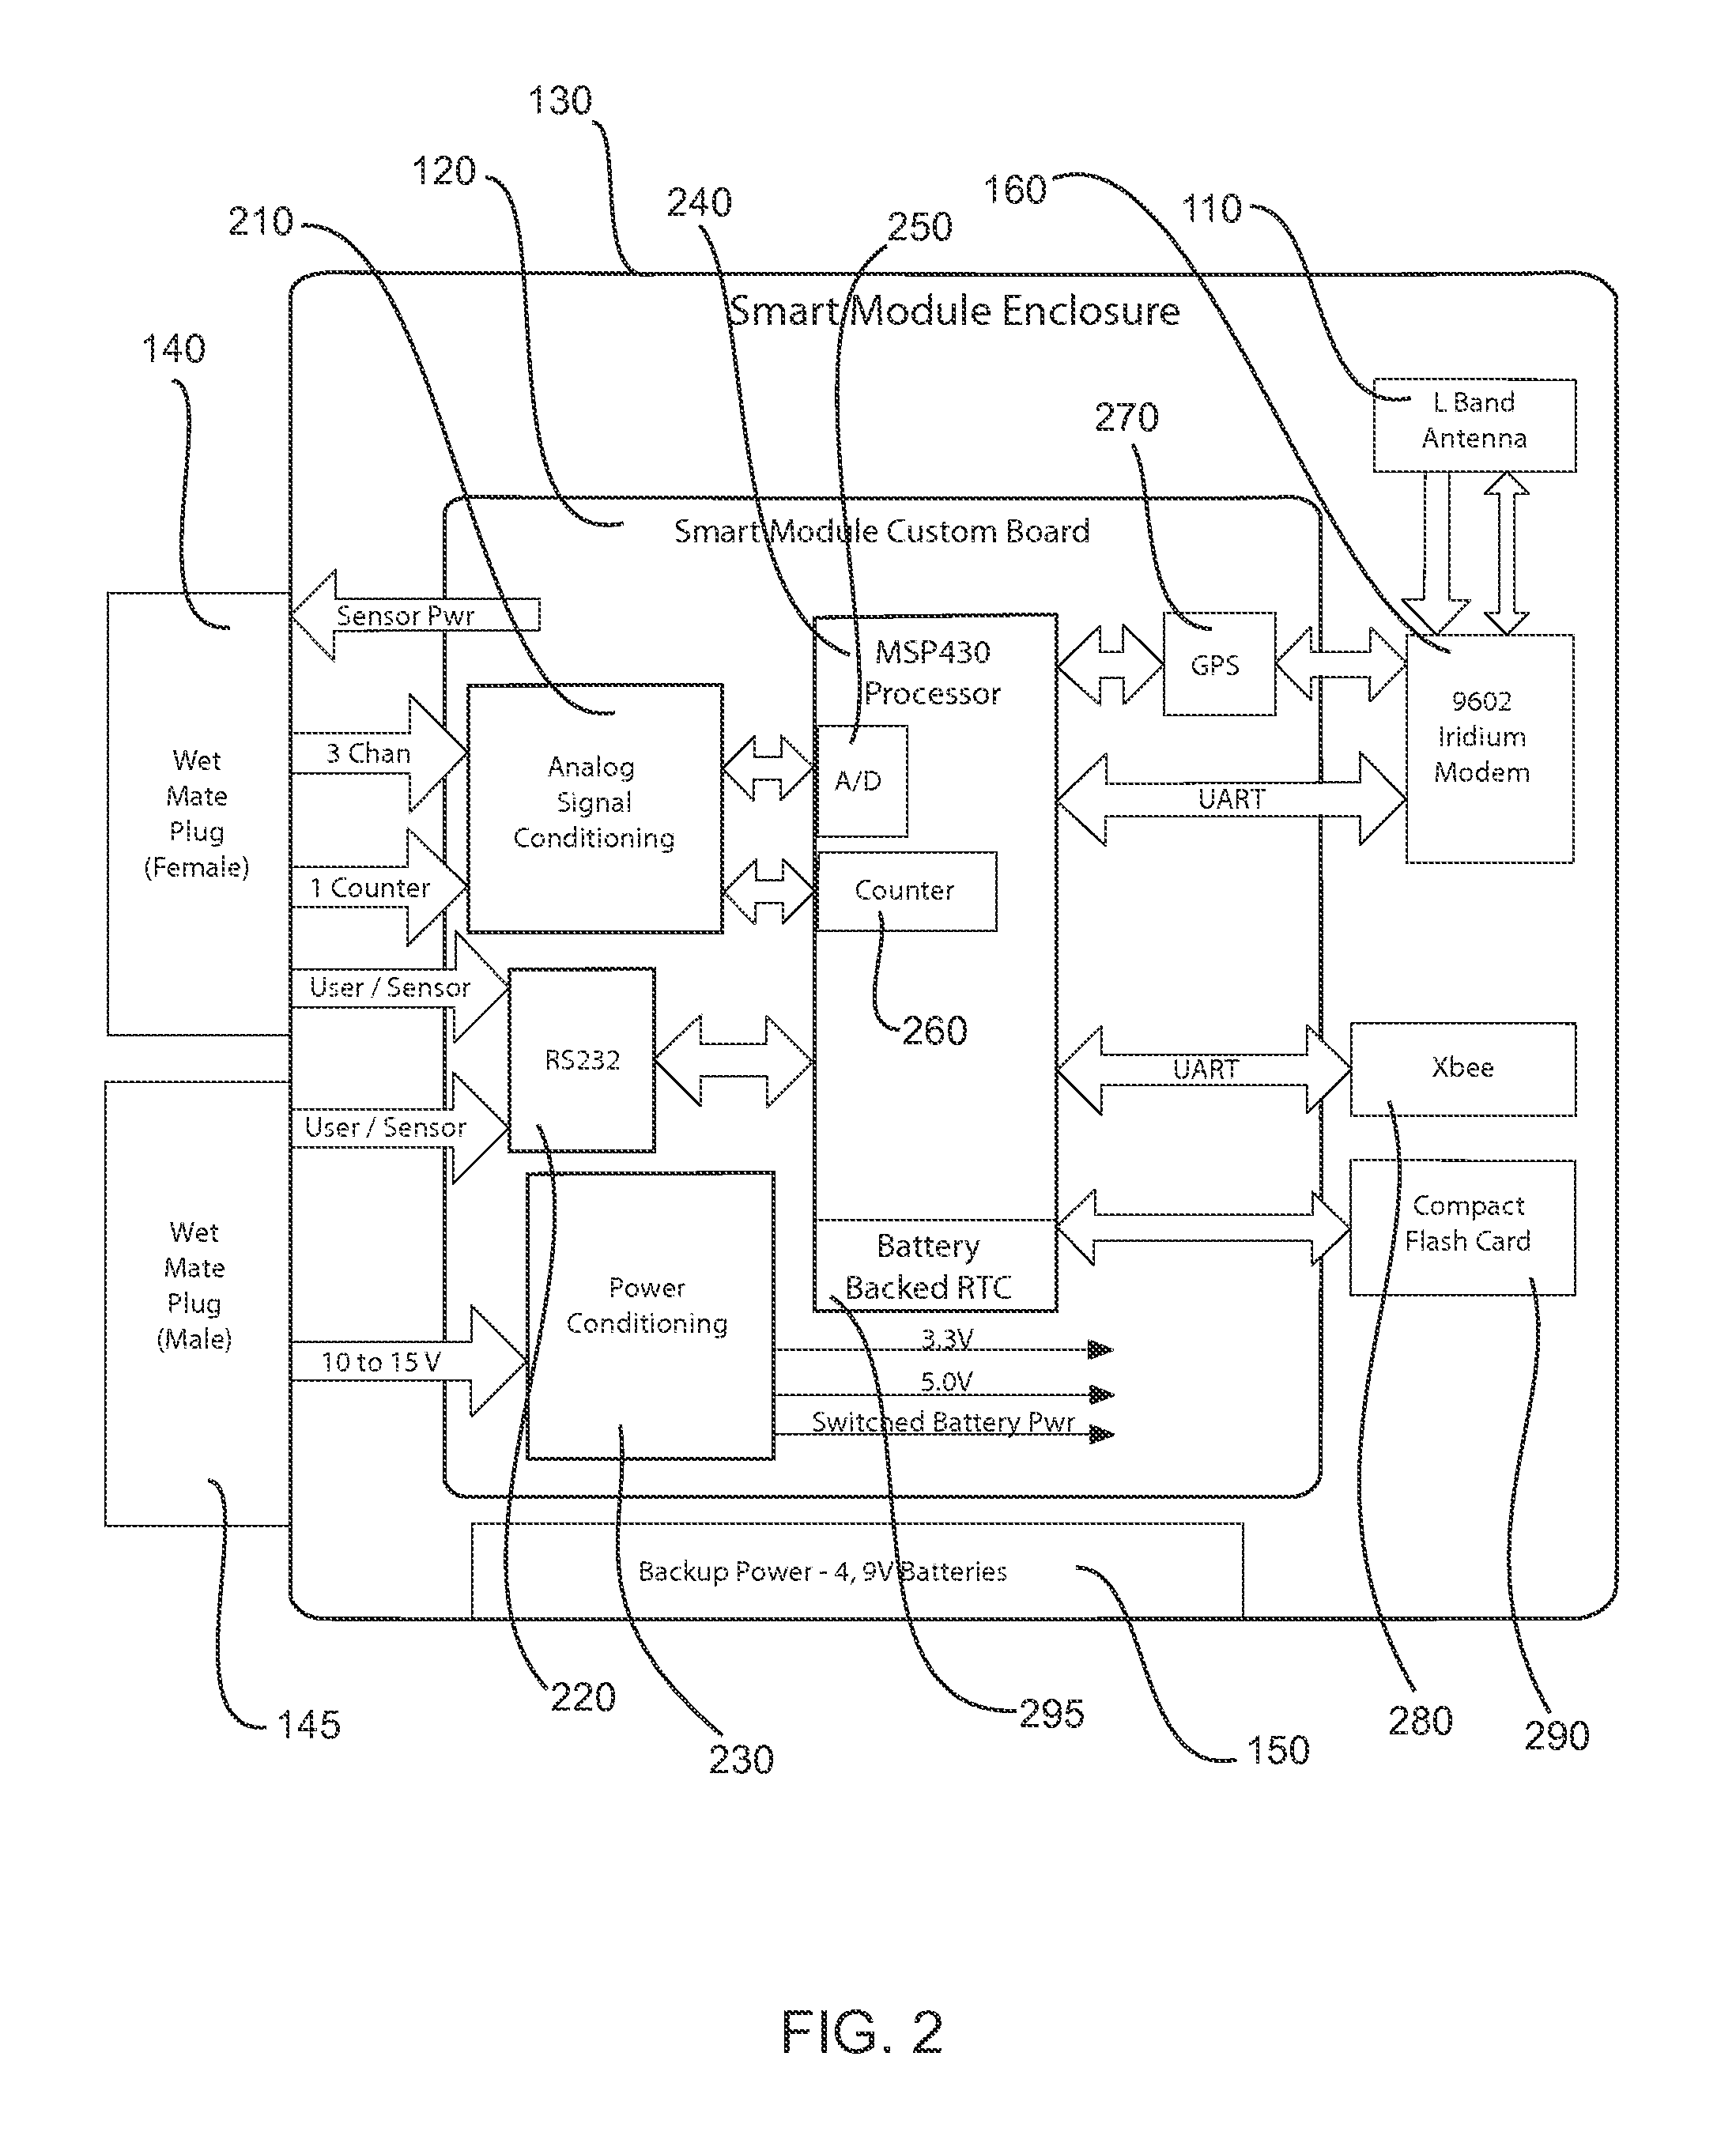 Smart module for communications, processing, and interface